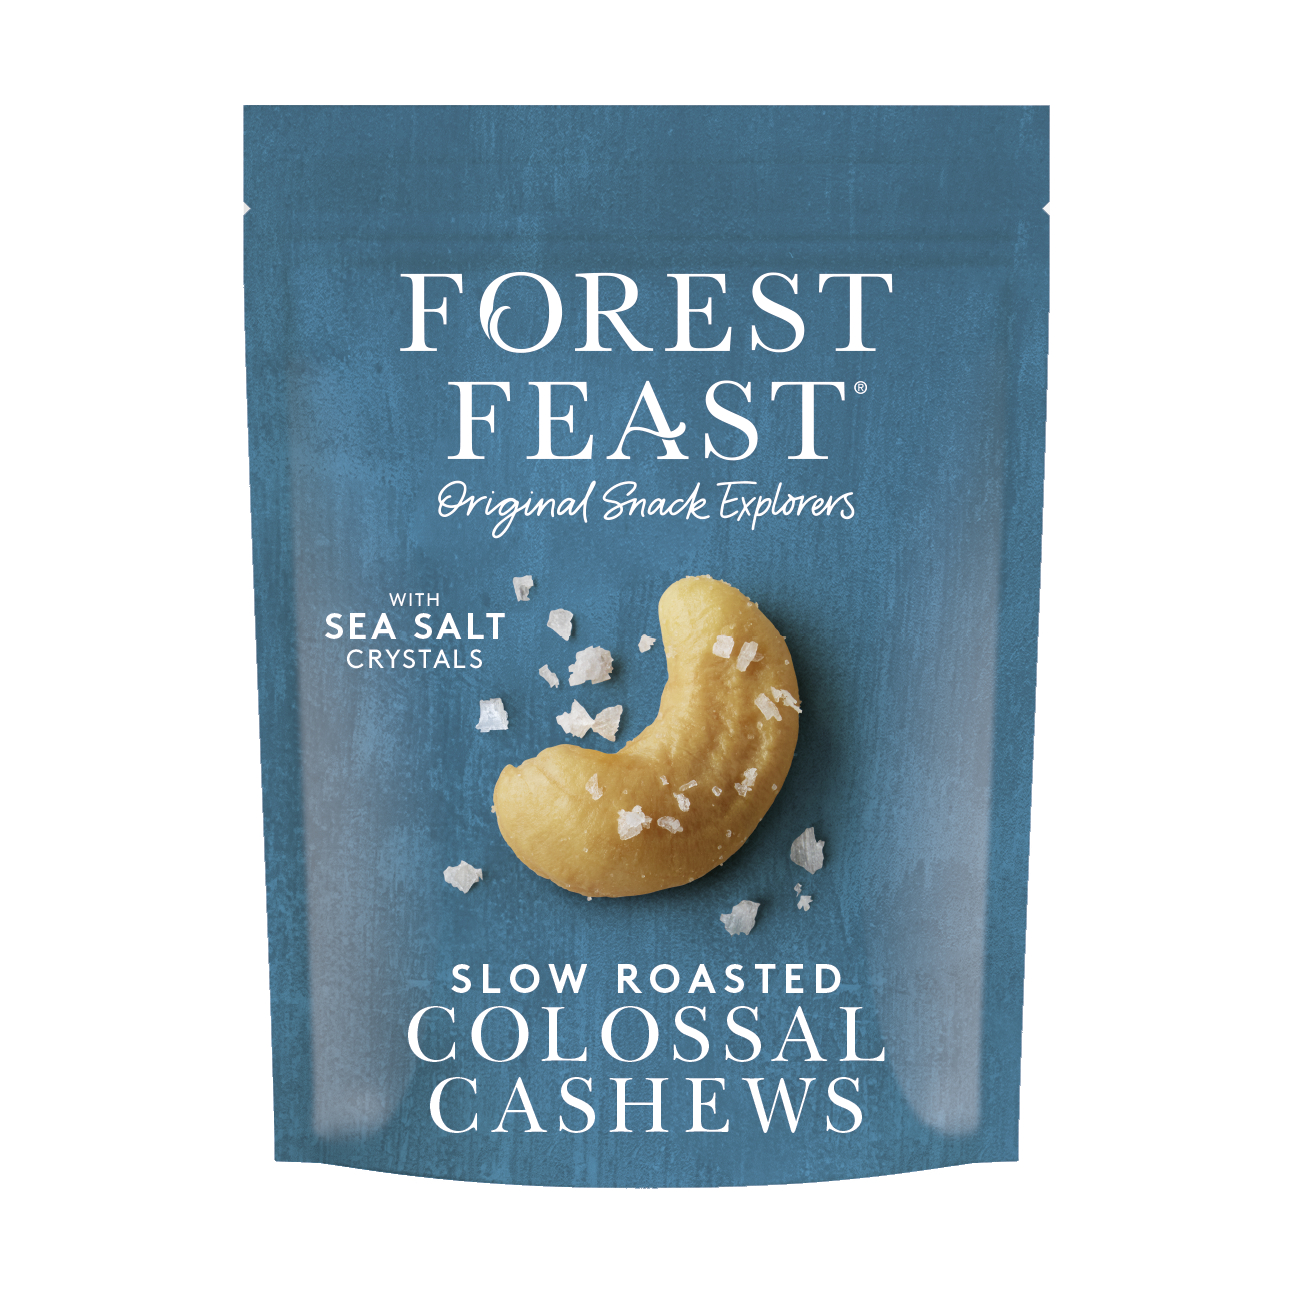 FOREST FEAST Cashew Nuts "colossal" 120g